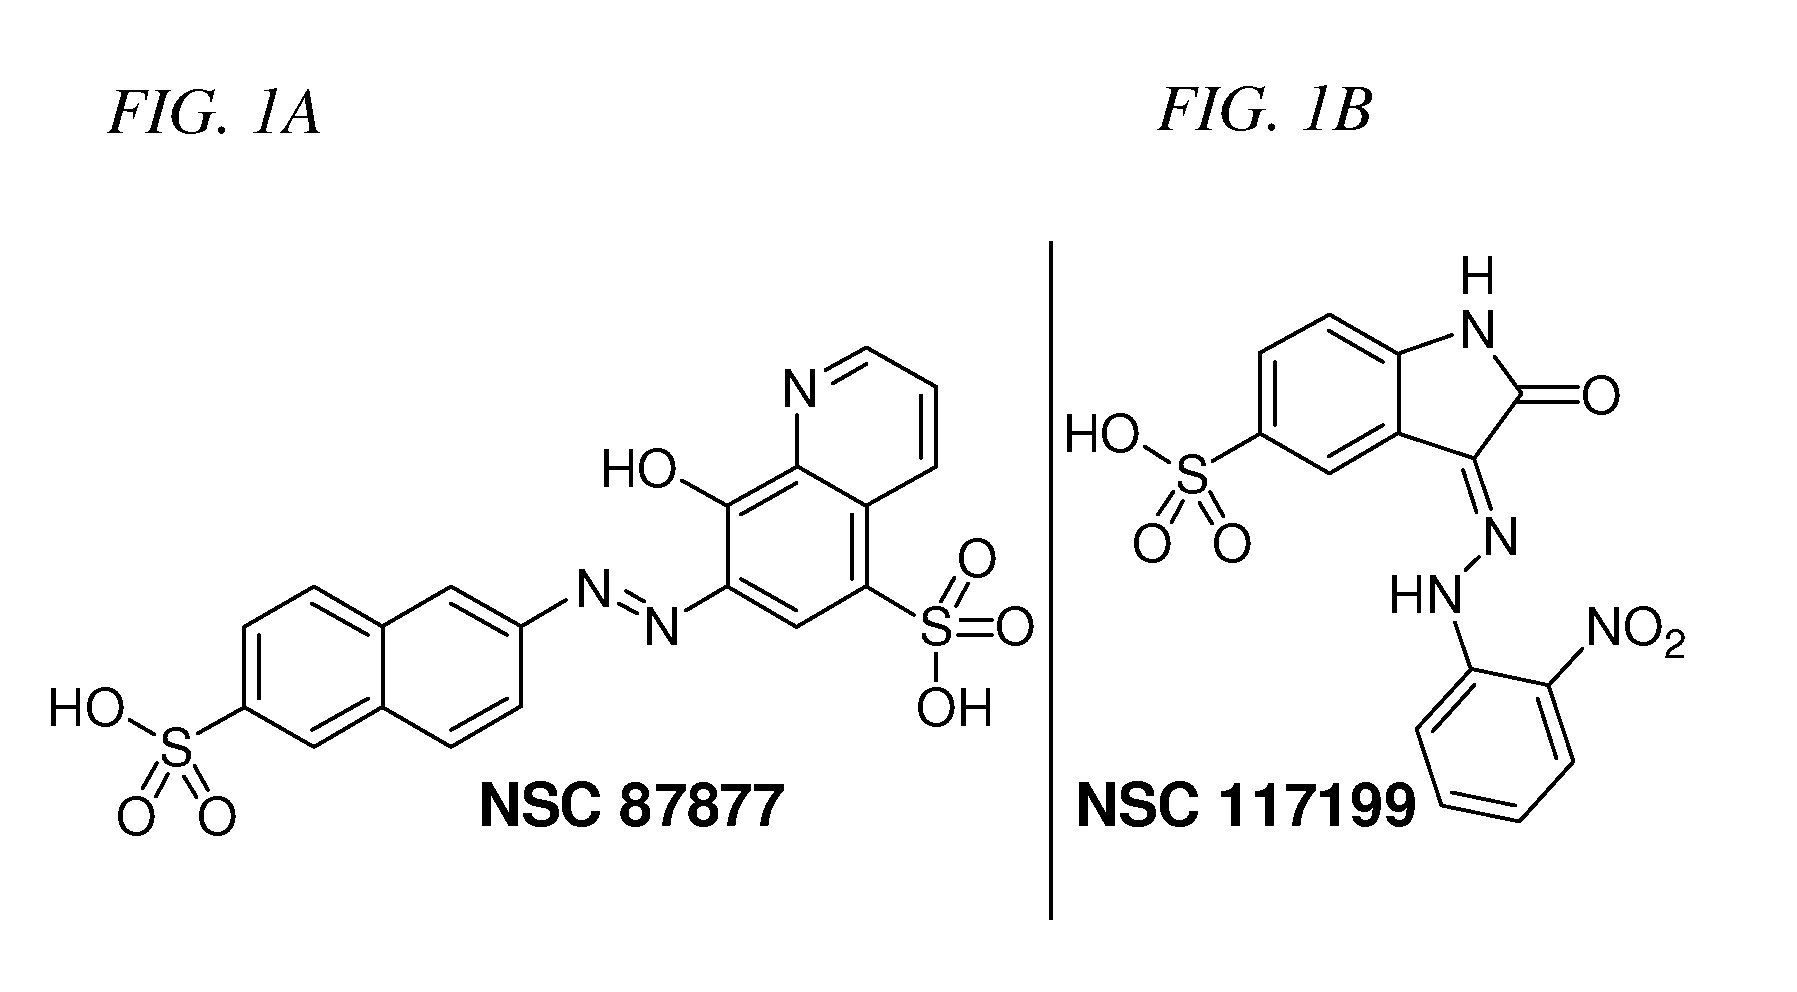 Inhibition of Shp2/PTPN11 Protein Tyrosine Phosphatase by NSC-87877, NSC-117199 and Their Analogs